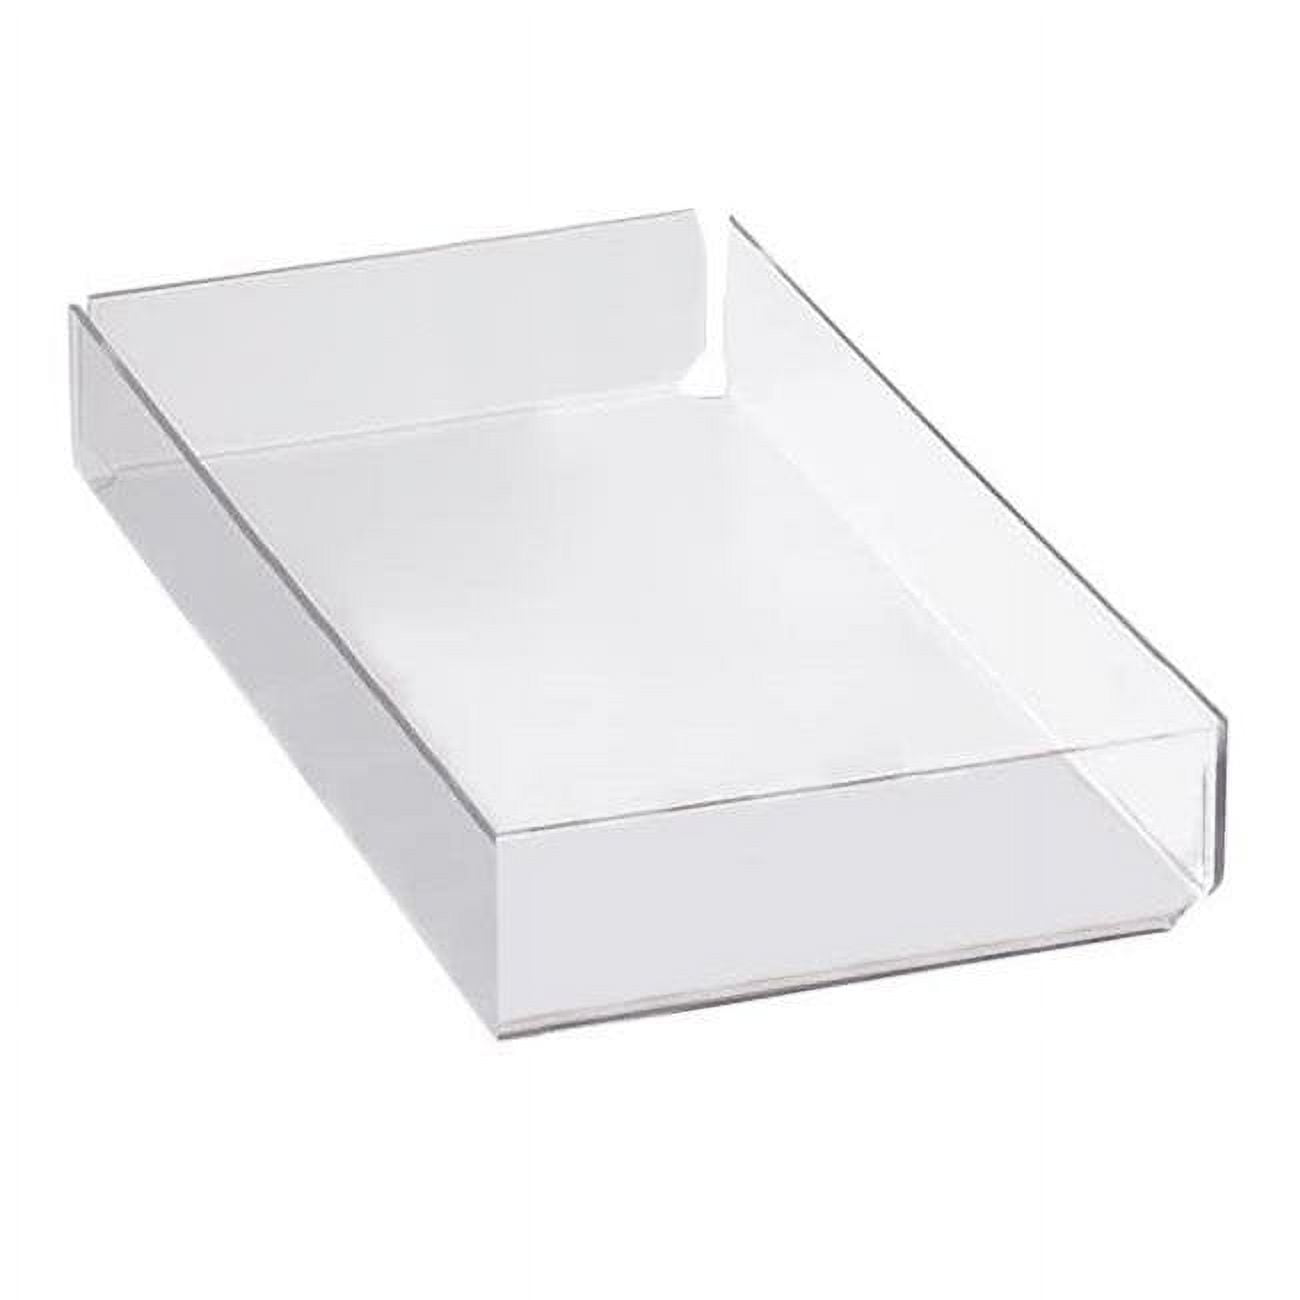 Picture of Cal Mil 1204DRAWER Clear Replacement Drawer for Bread Boxes - 5.875 x 11.625 x 1.625 in.